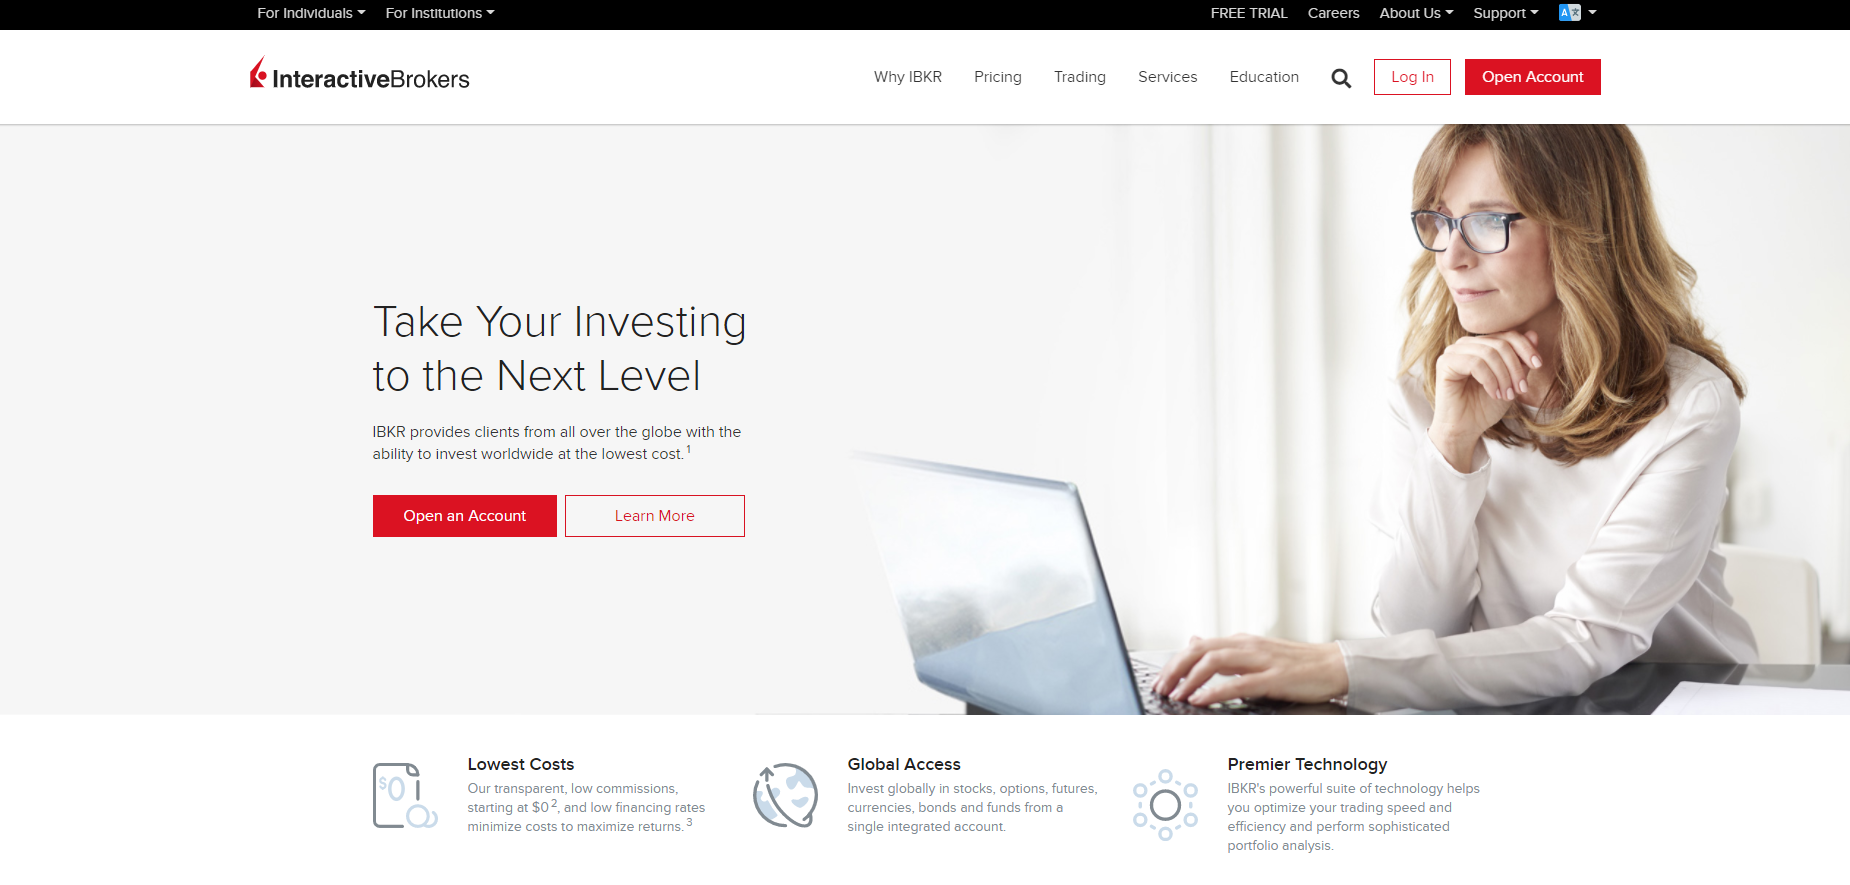 The official website of Interactive Brokers